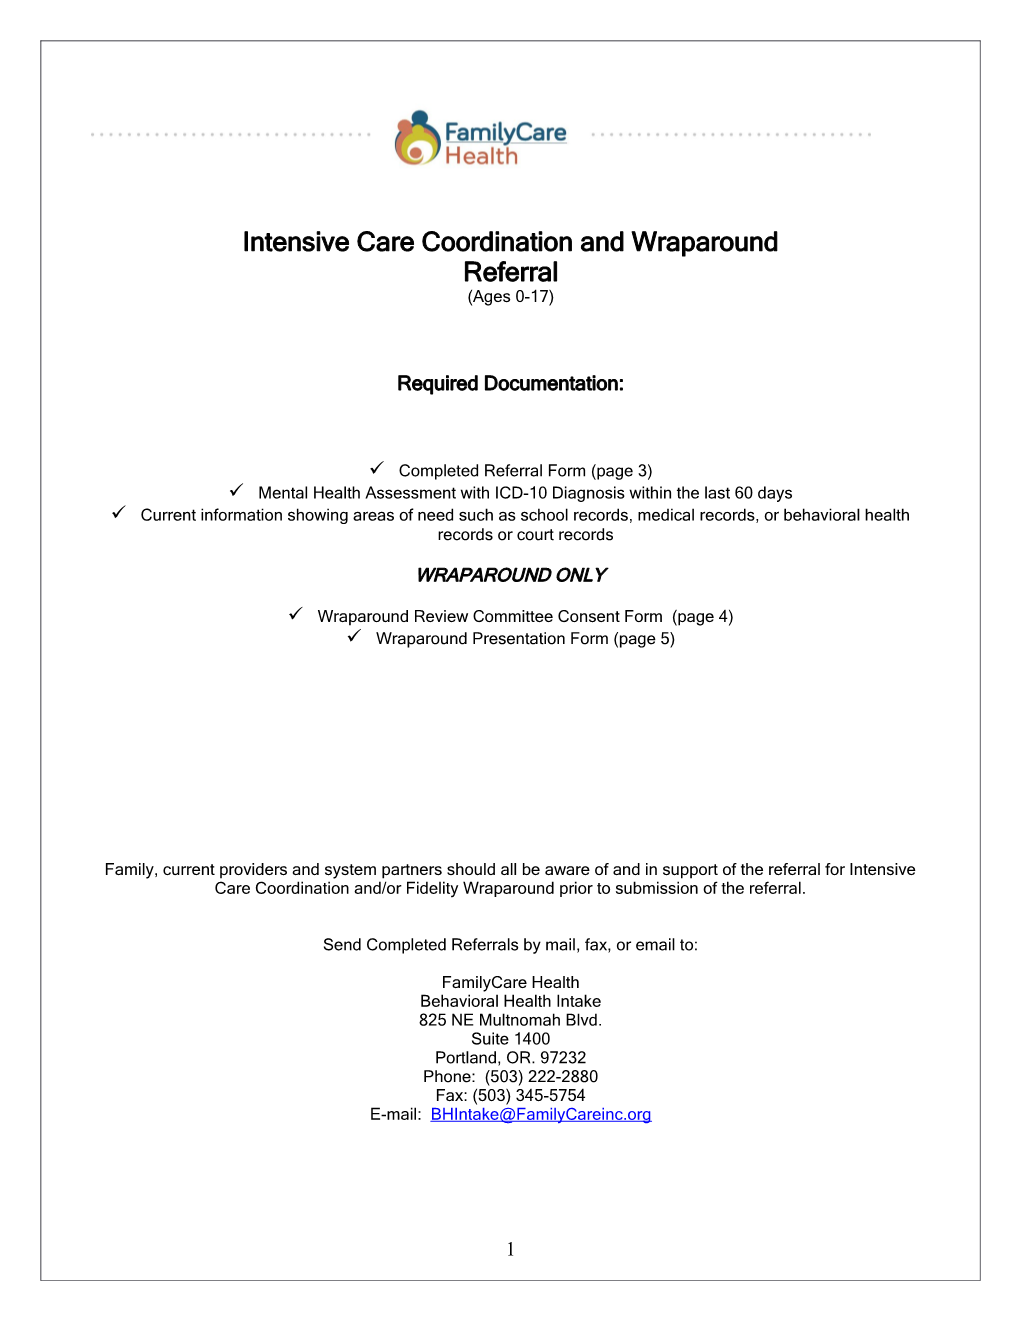 Intensive Care Coordination and Wraparound